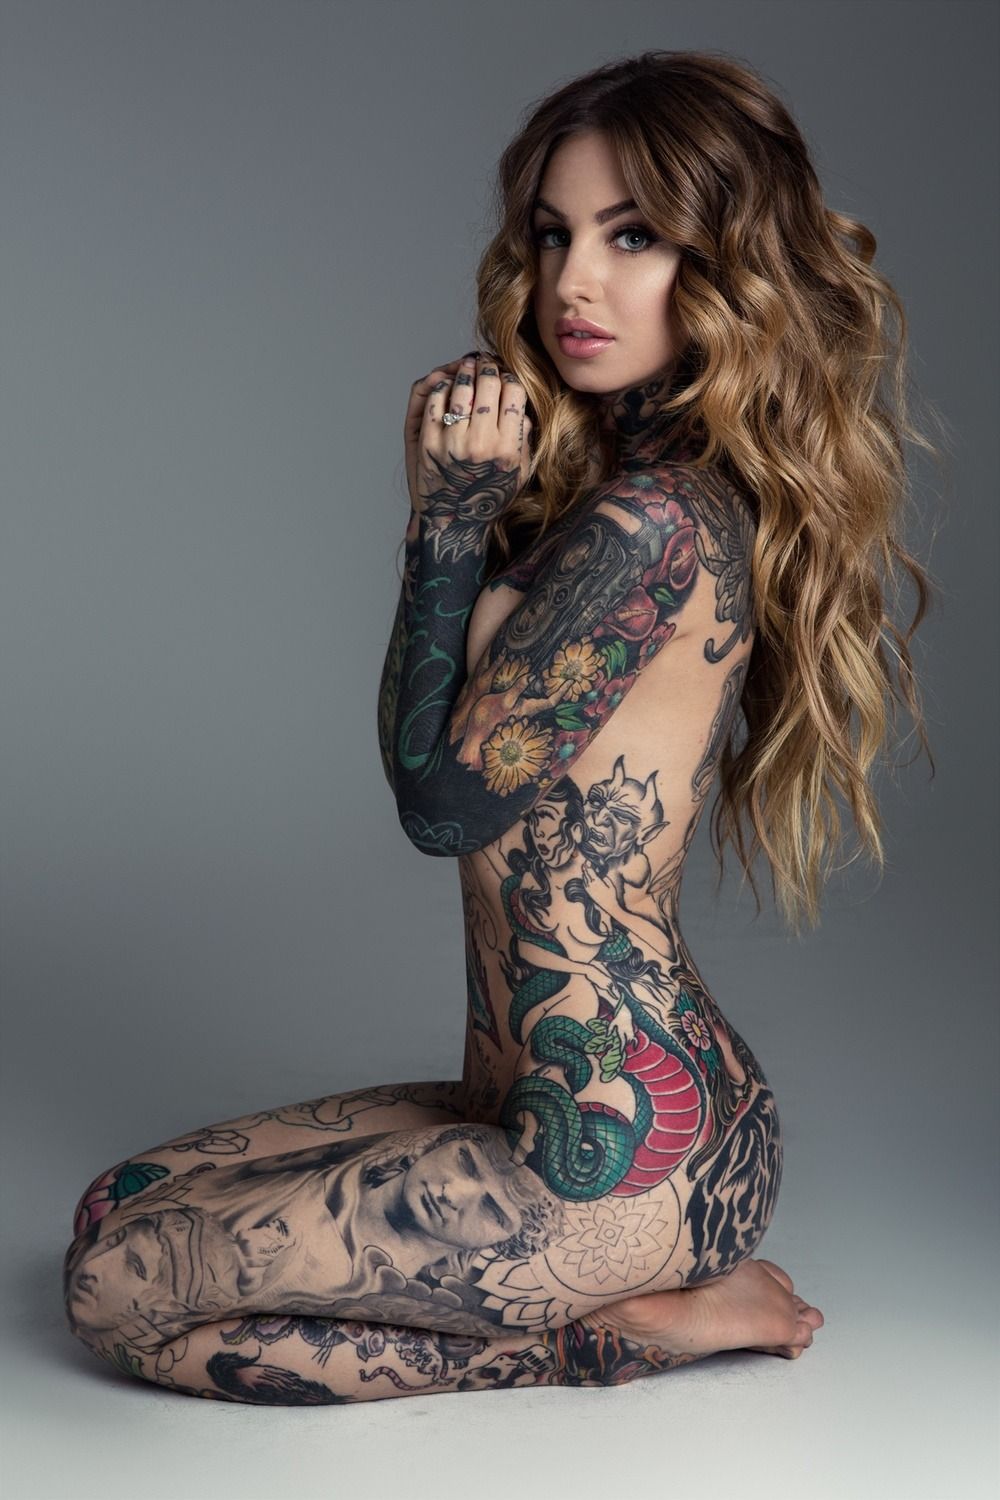 Girls with tattoos